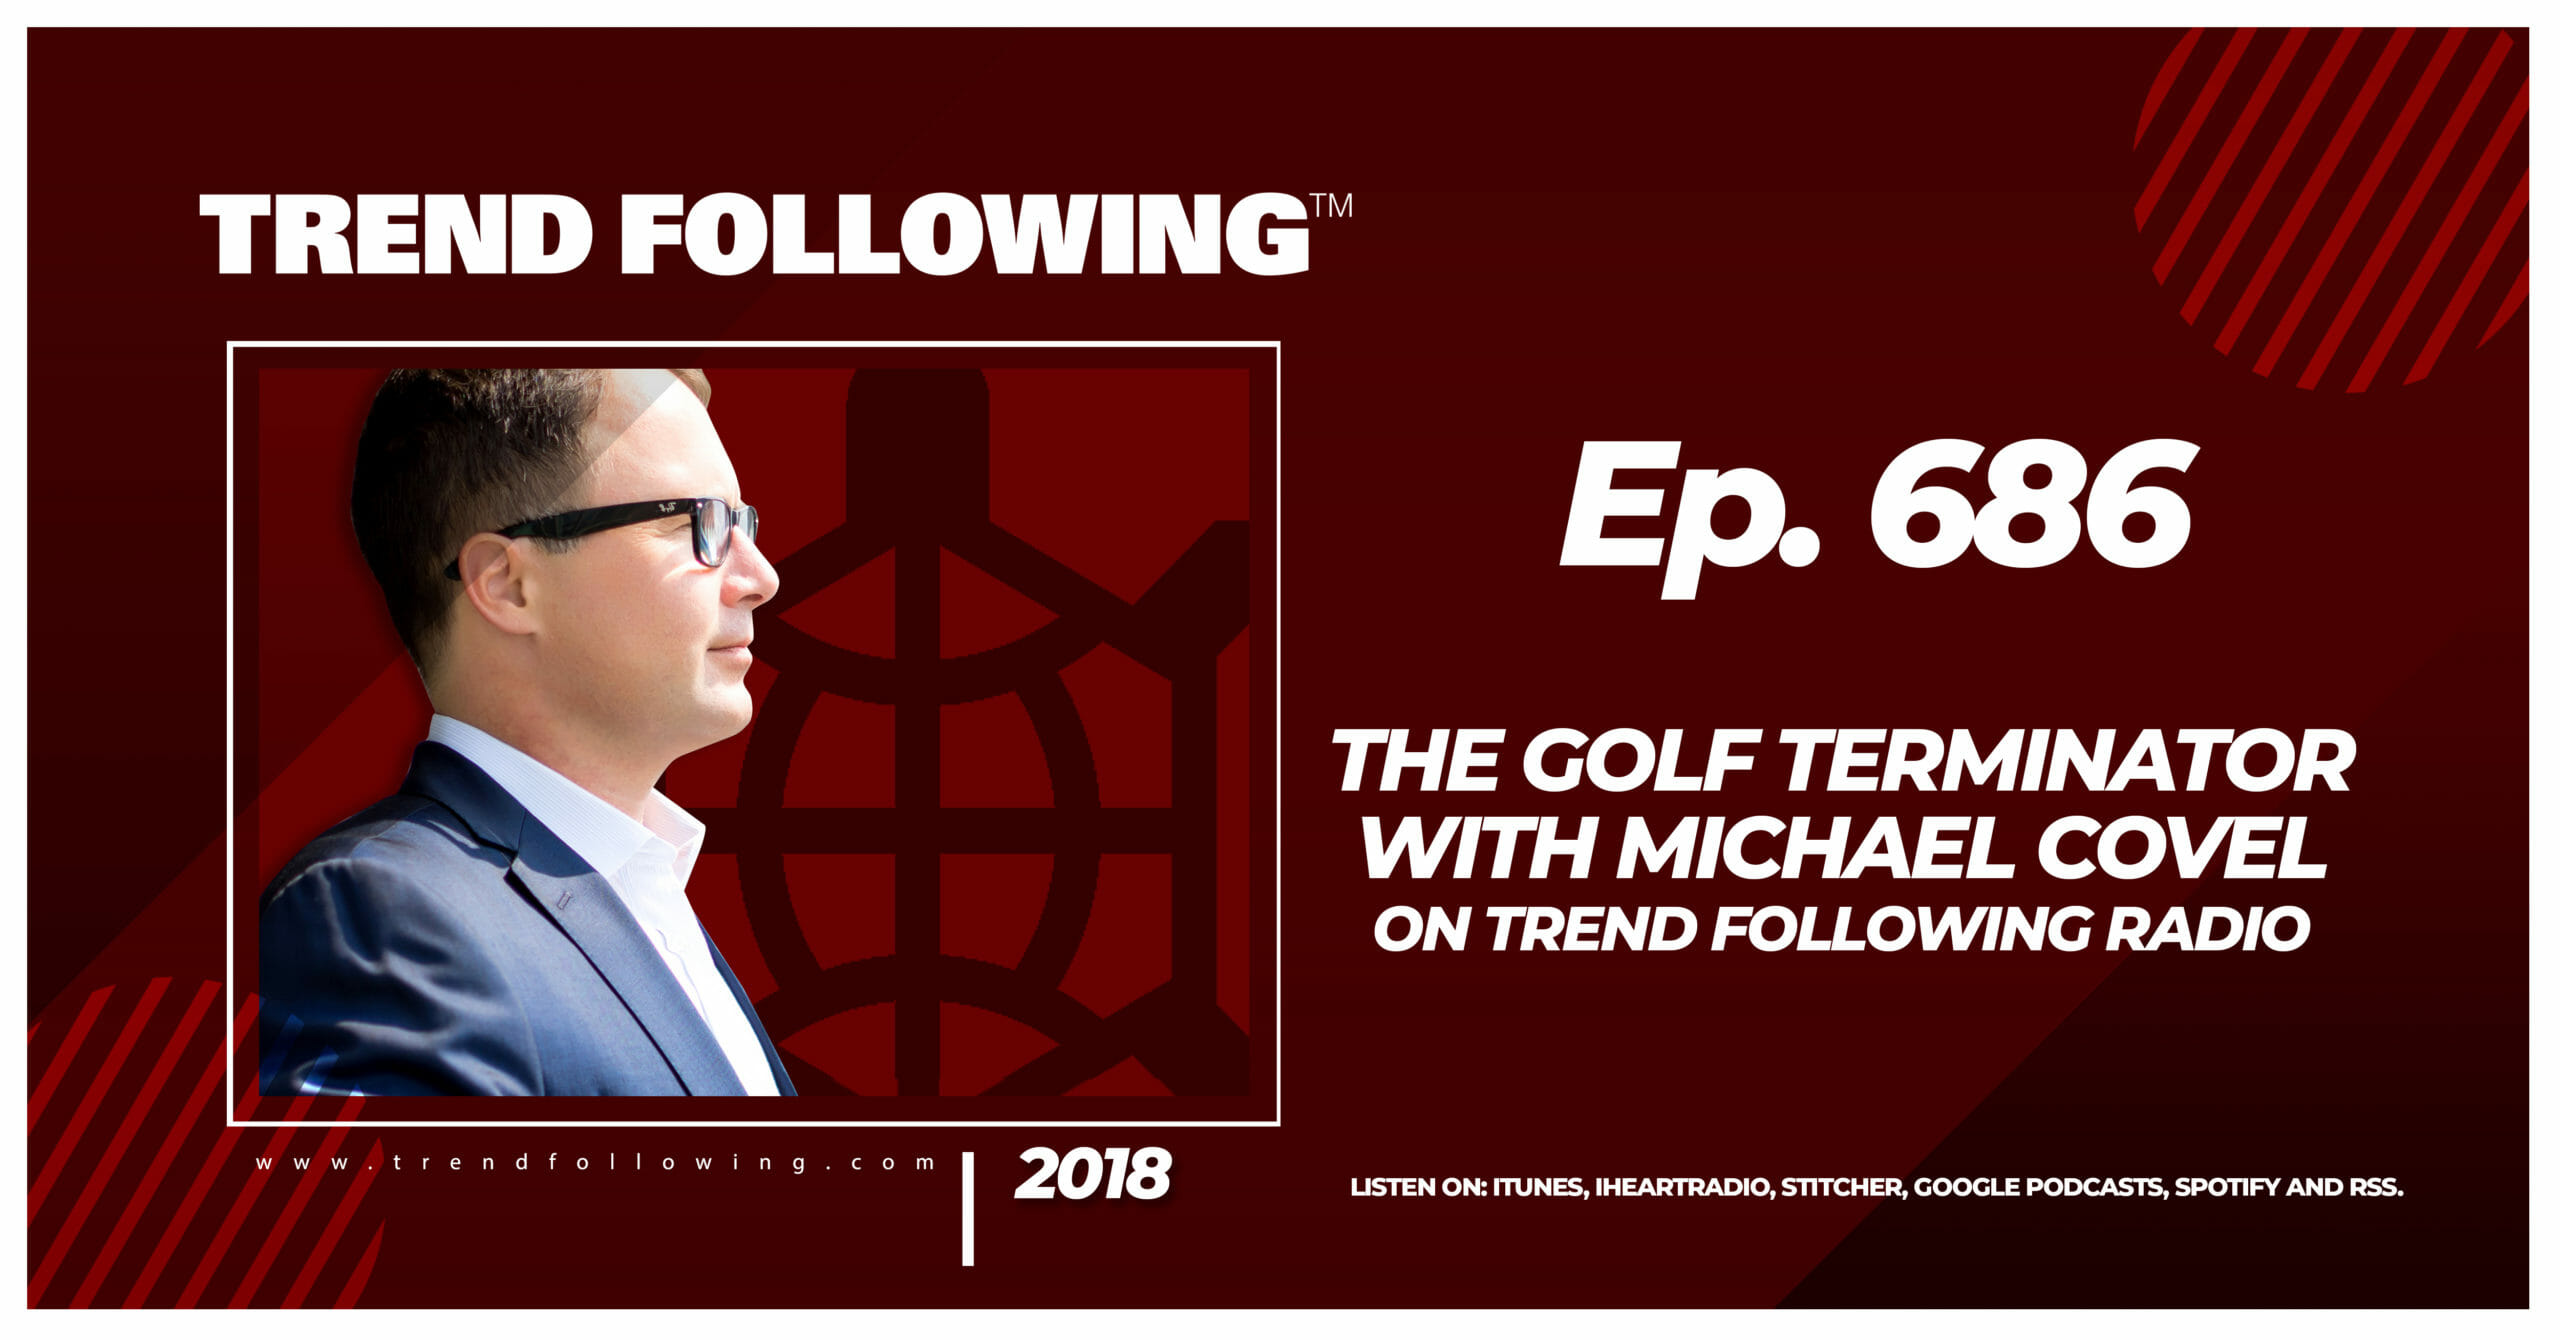 The Golf Terminator with Michael Covel on Trend Following Radio